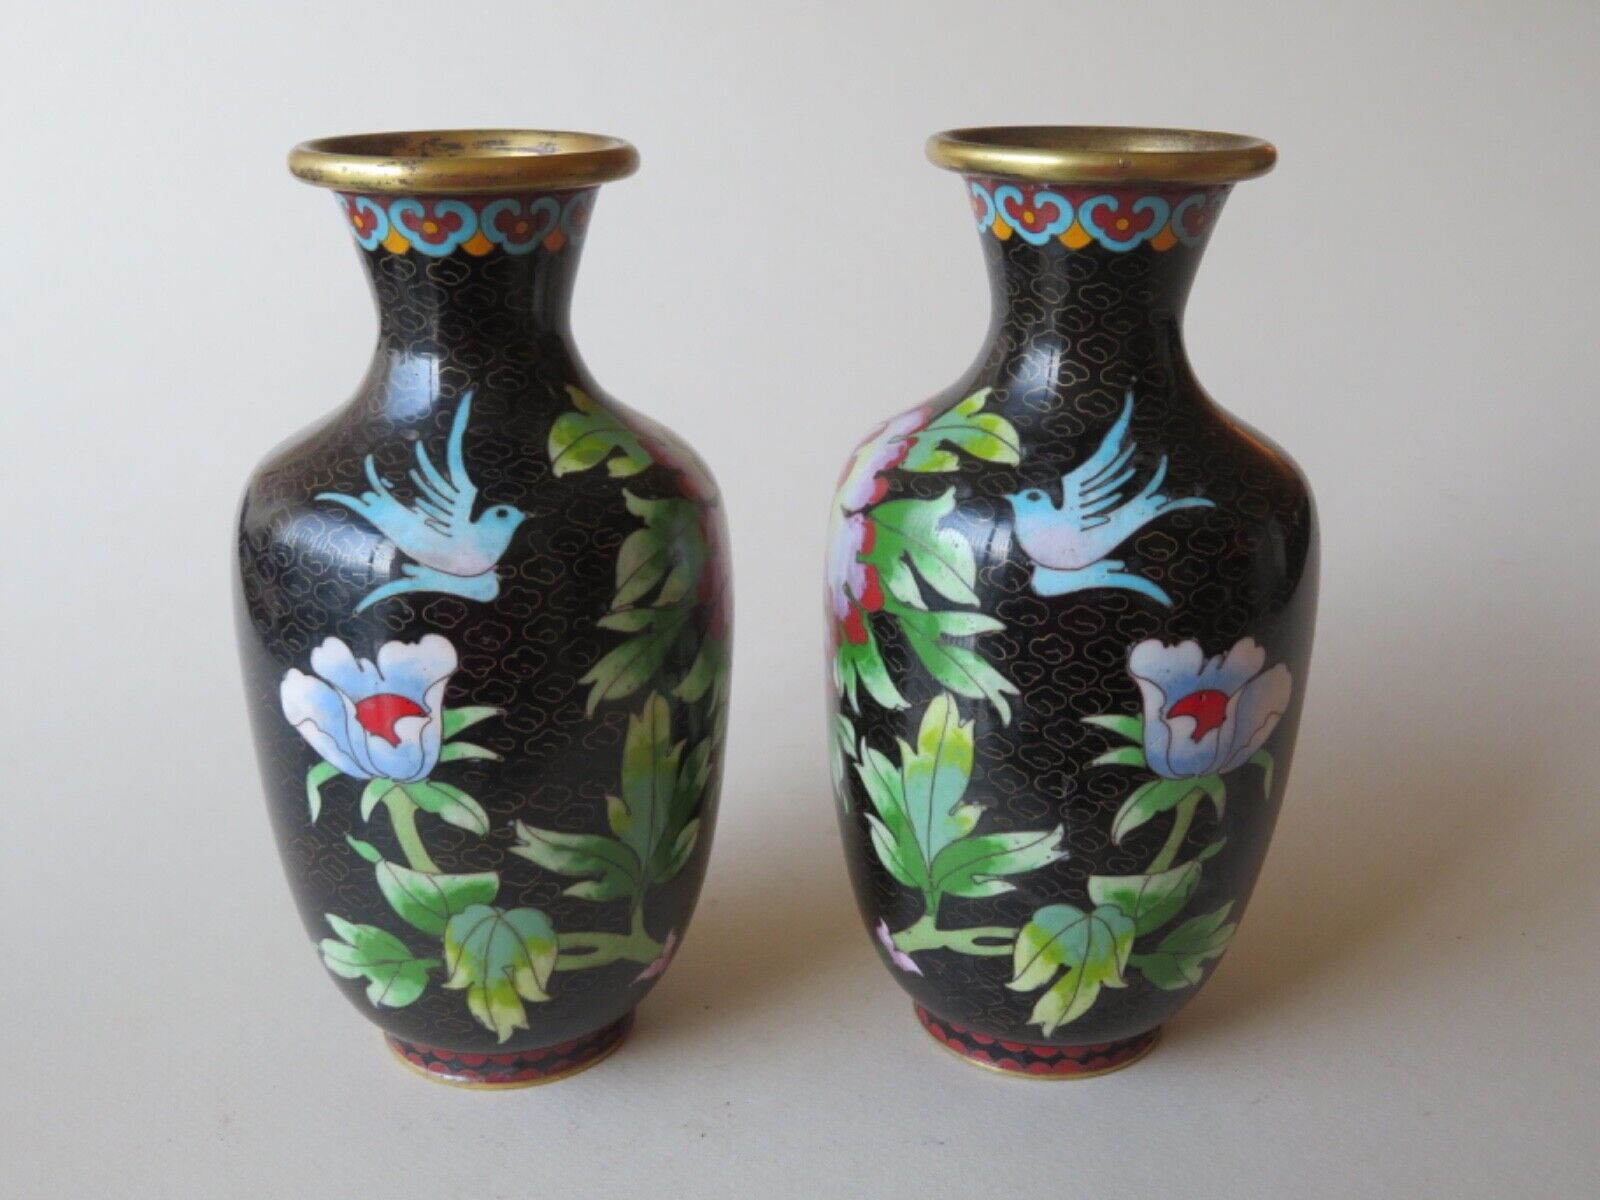 PAIR OF OLD CHINESE CLOISONNE VASES, PEONY, BIRDS, NARCISSUS ETC.